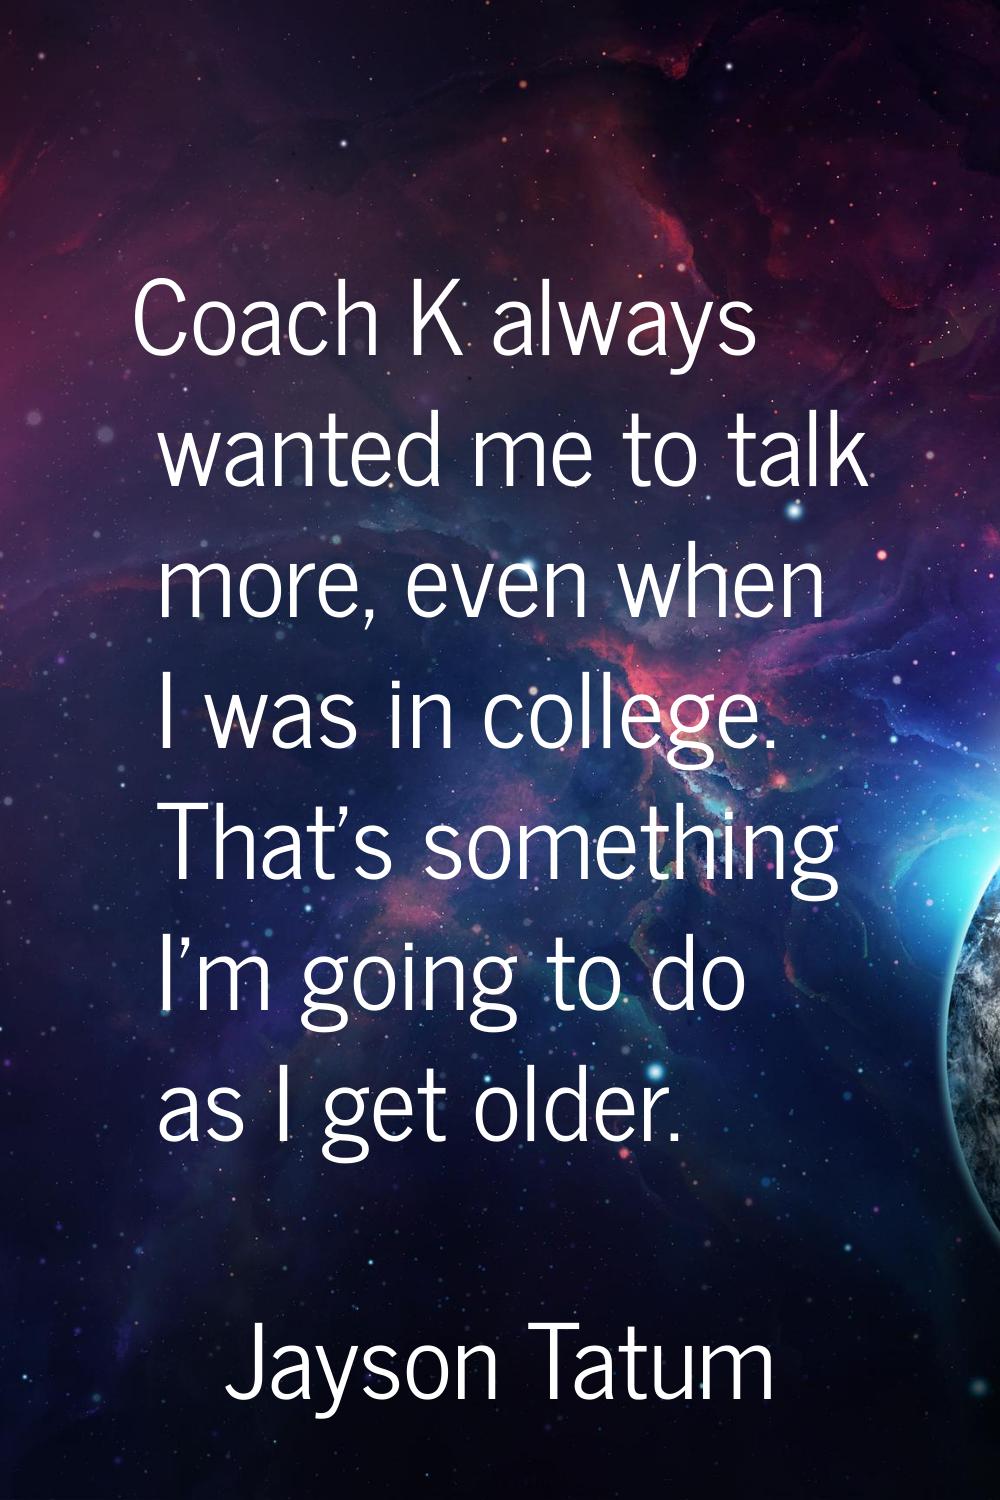 Coach K always wanted me to talk more, even when I was in college. That's something I'm going to do